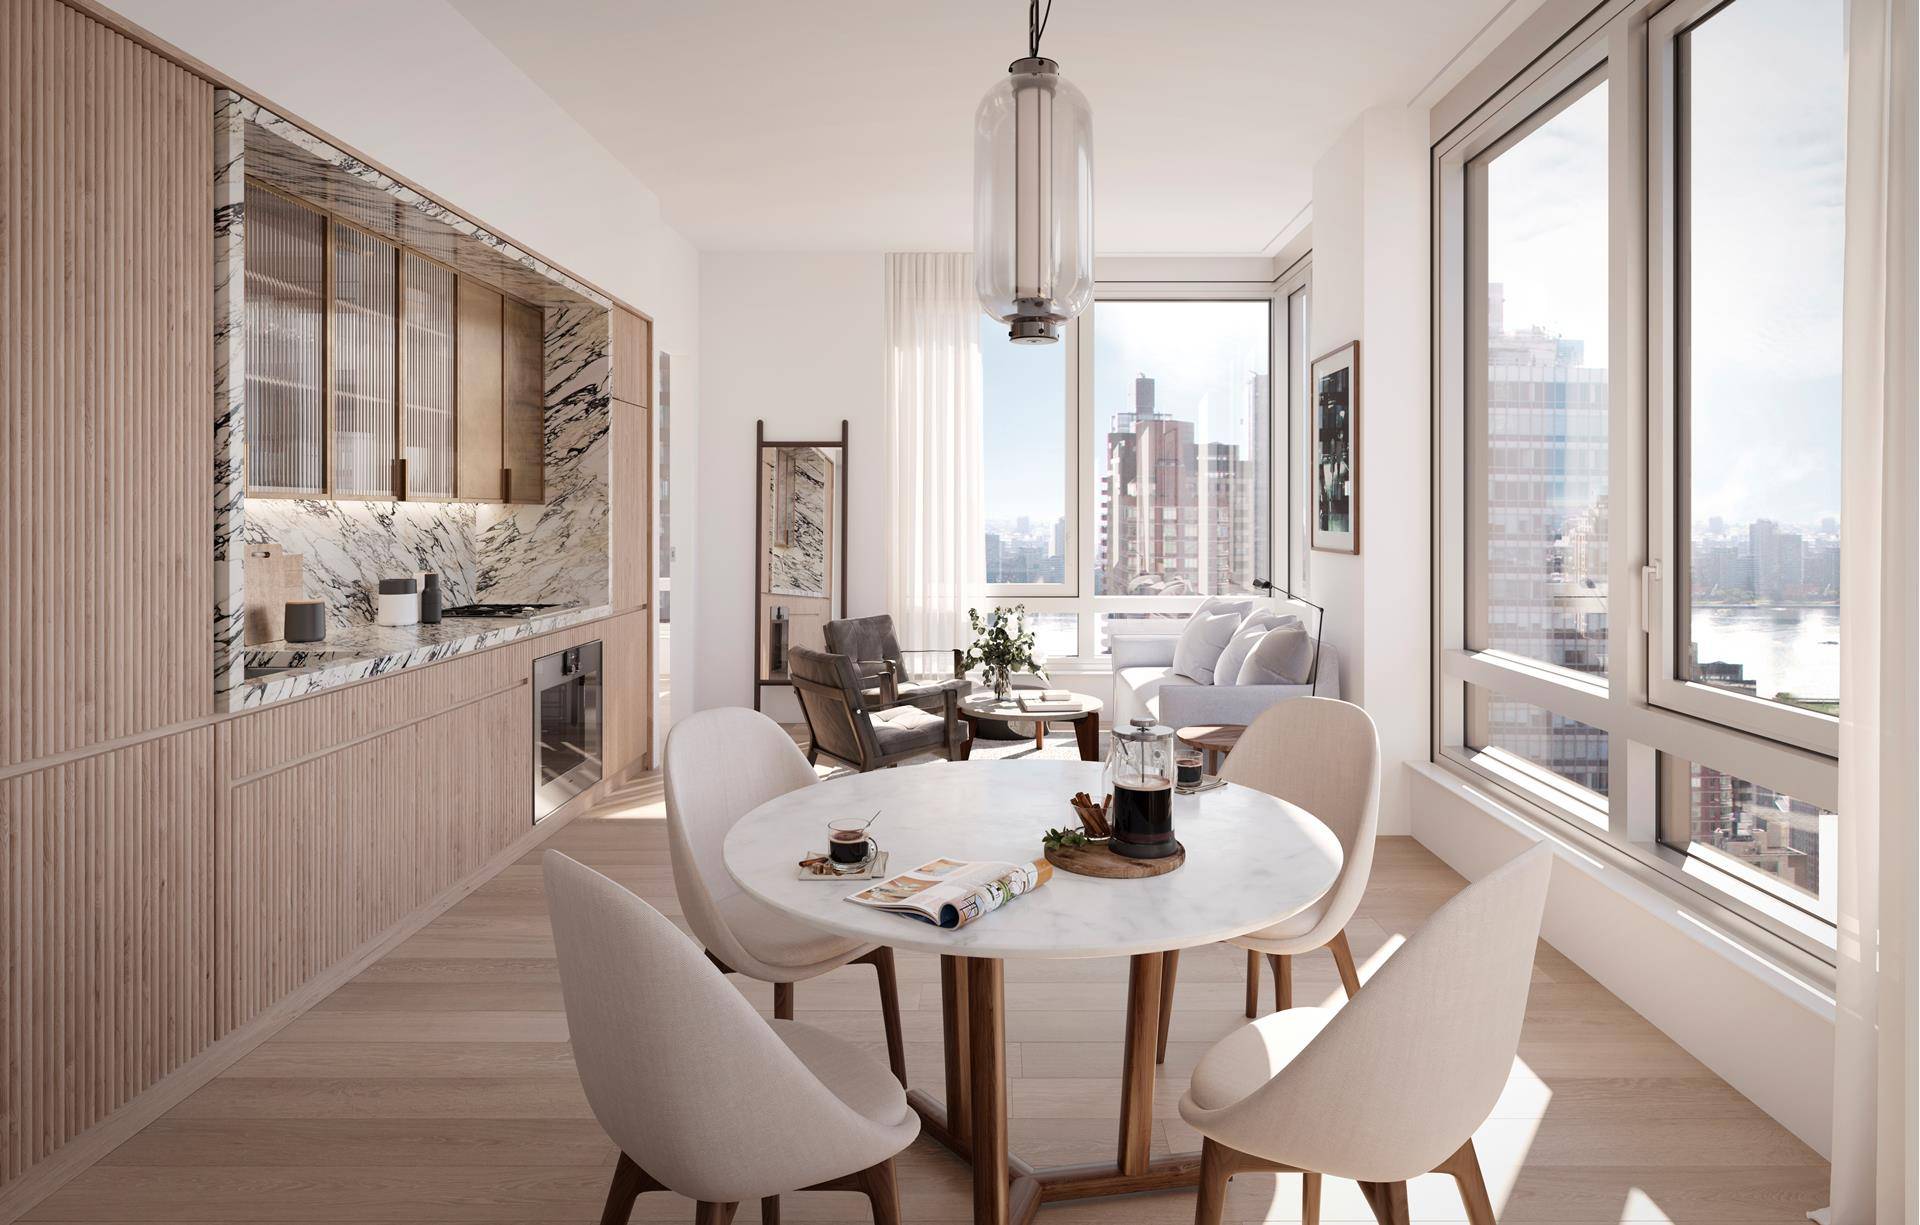 Introducing Monogram New York, Manhattan's newest collection of luxury residences nestled in the heart of the city's New Midtownat 135 East 47th Street.